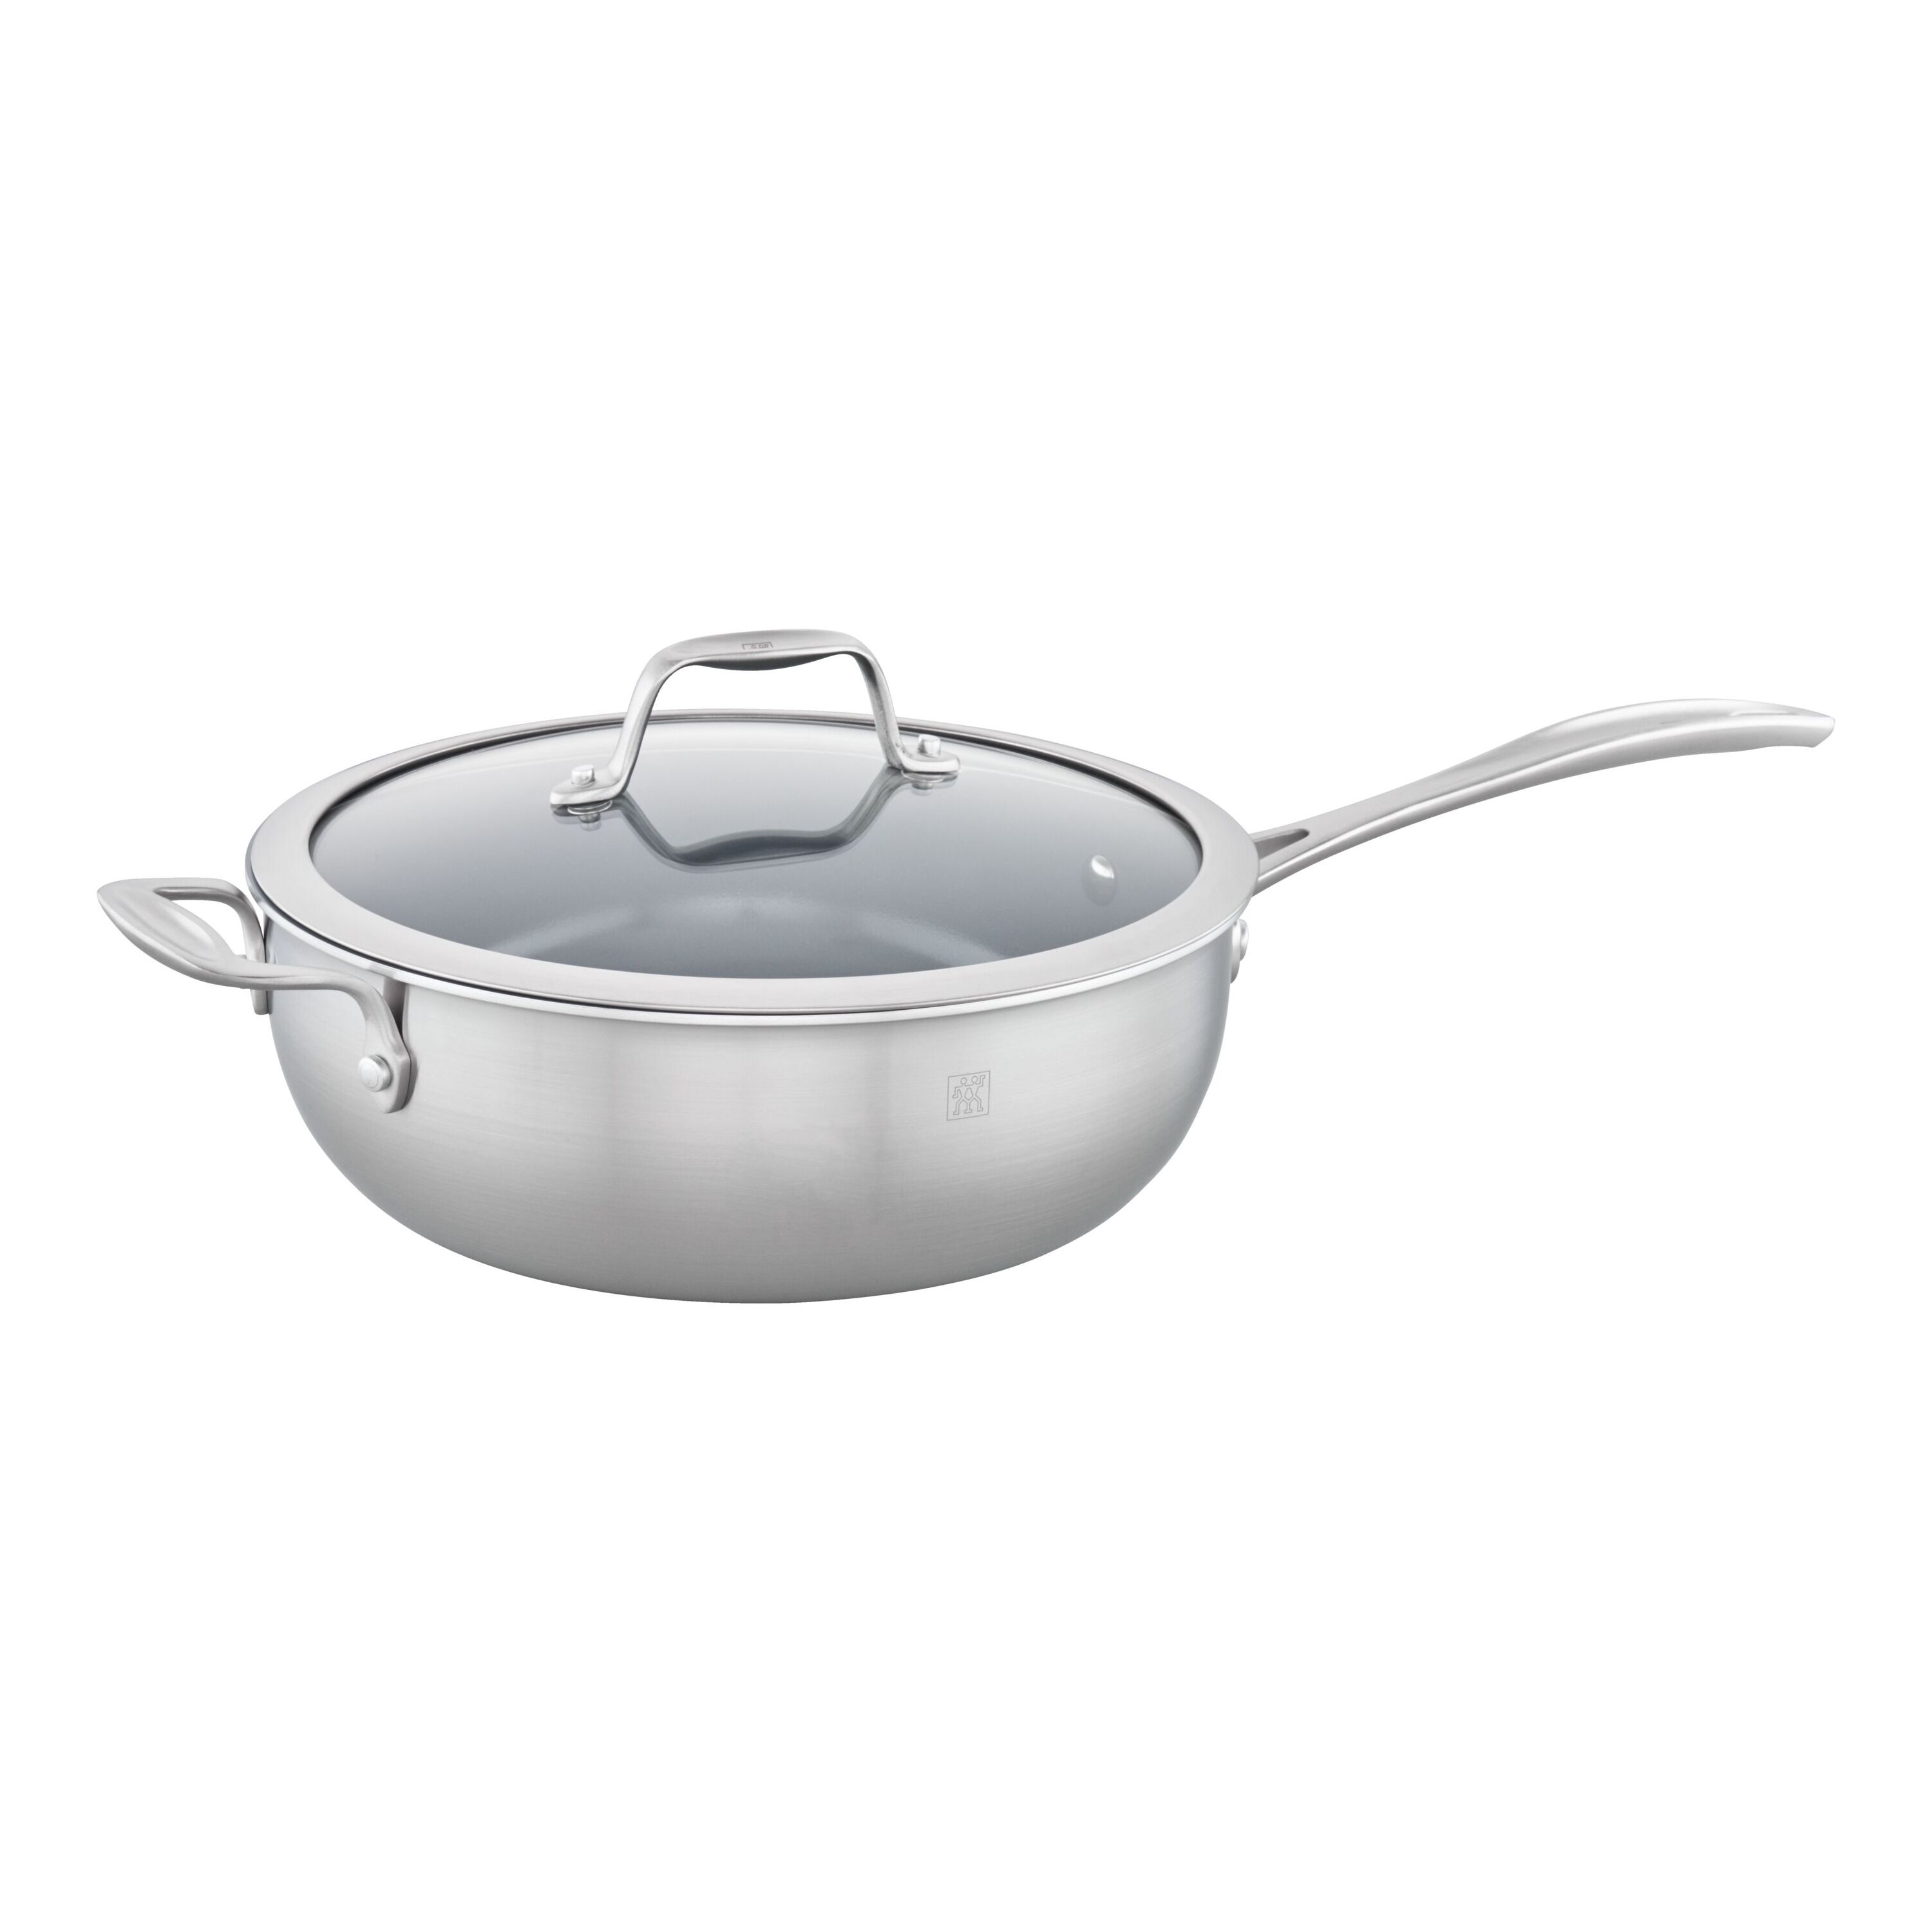 Induction 21 Steel Ceramic Coated Saute Skillet with Lid (5 Qt.)